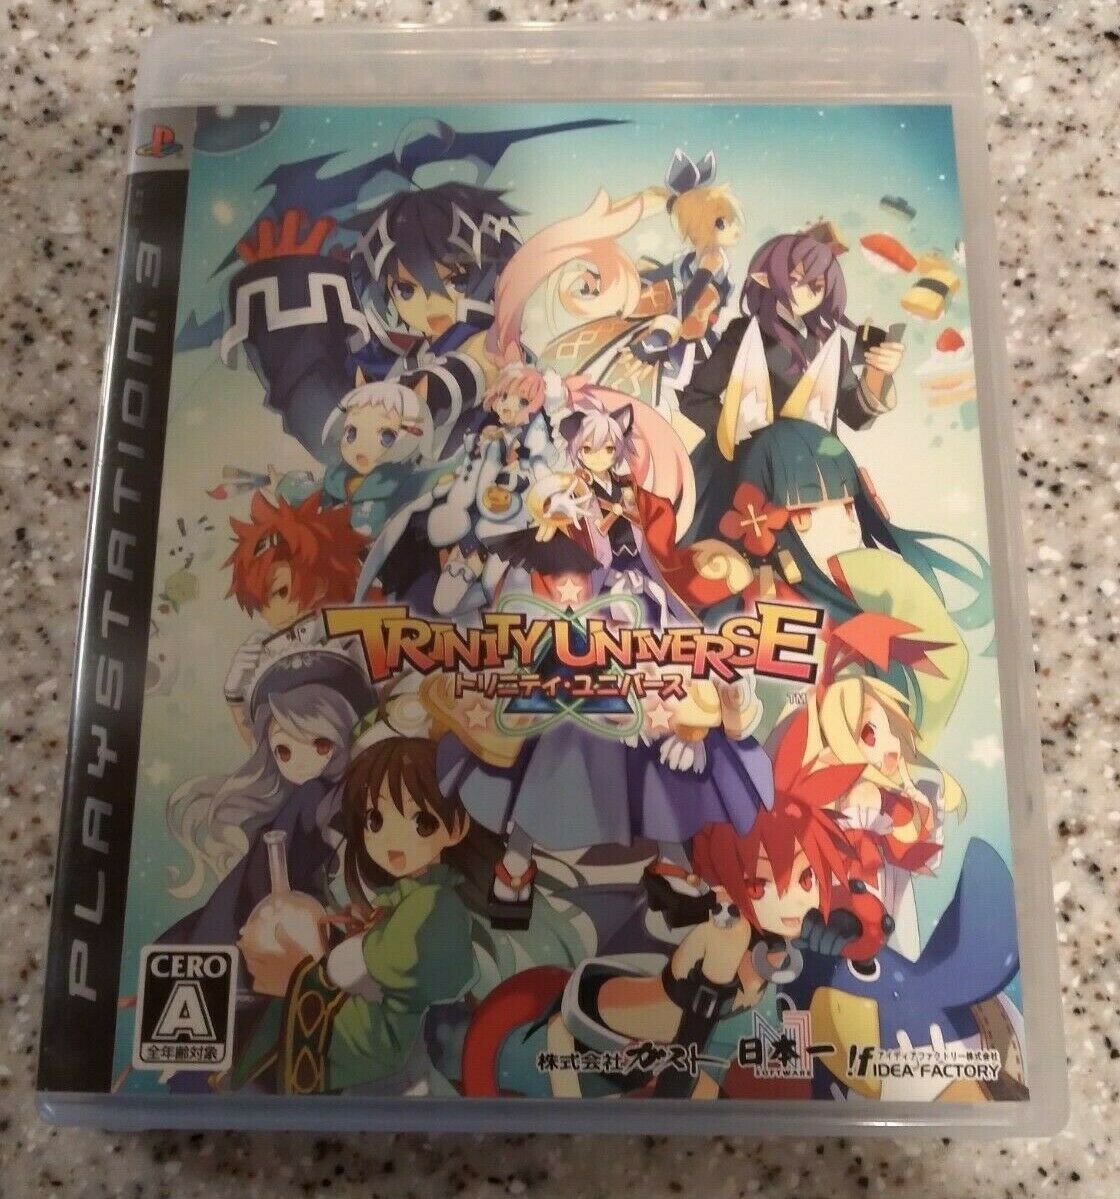 Trinity Universe (Sony PlayStation 3, 2009) With Manual Japan Import PS3